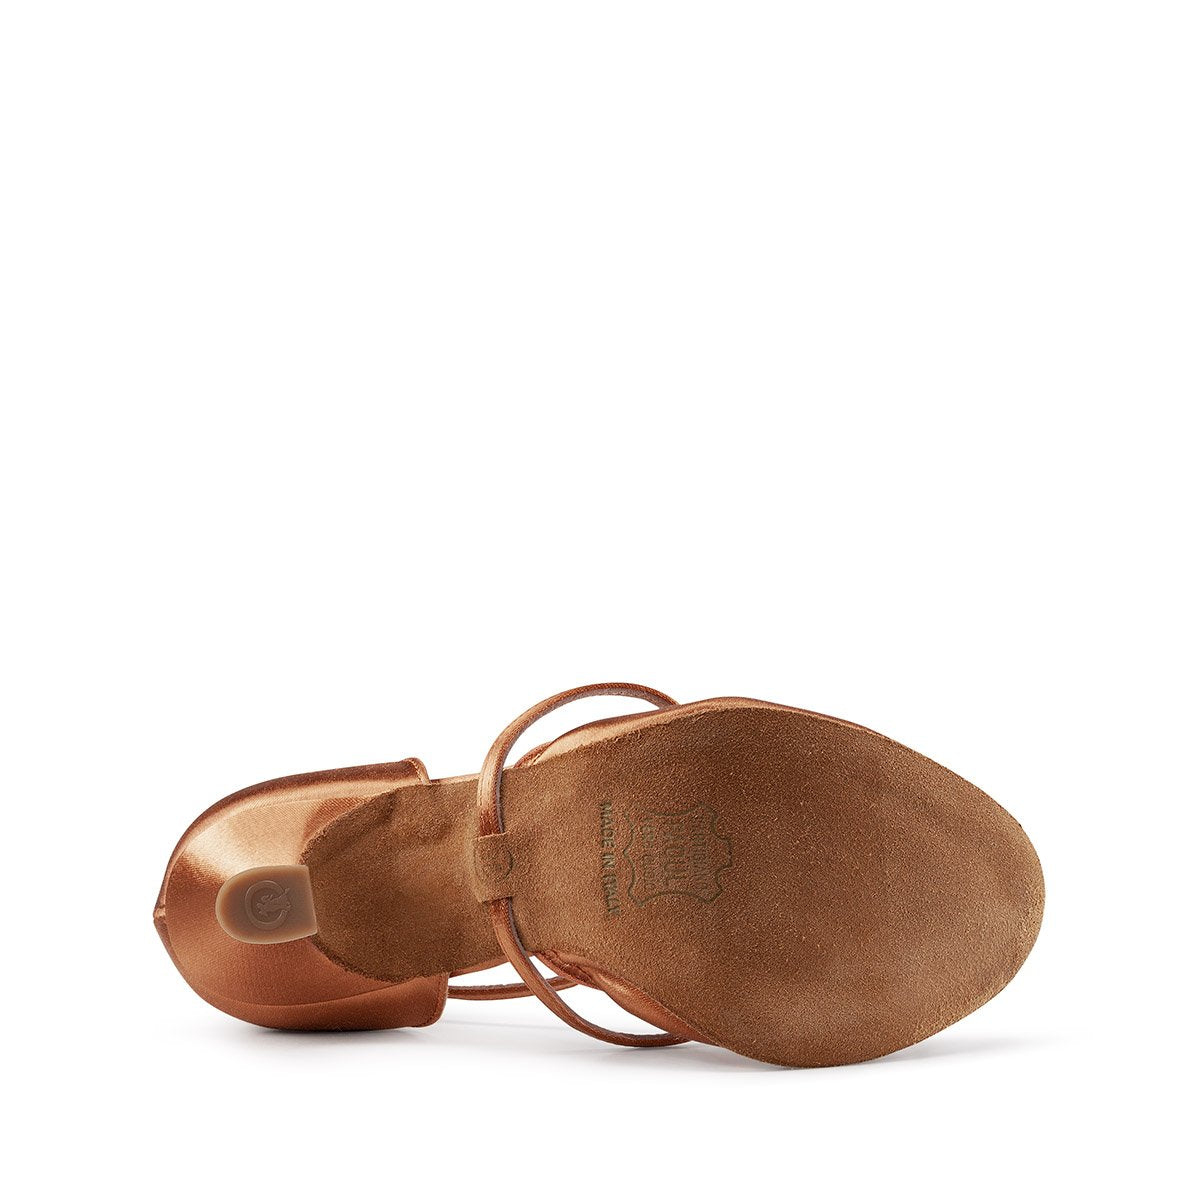 Paoul Streamline Flesh or Tan Satin Ladies Smooth Ballroom Dance Shoe with Elastic Band and Crossed Strap